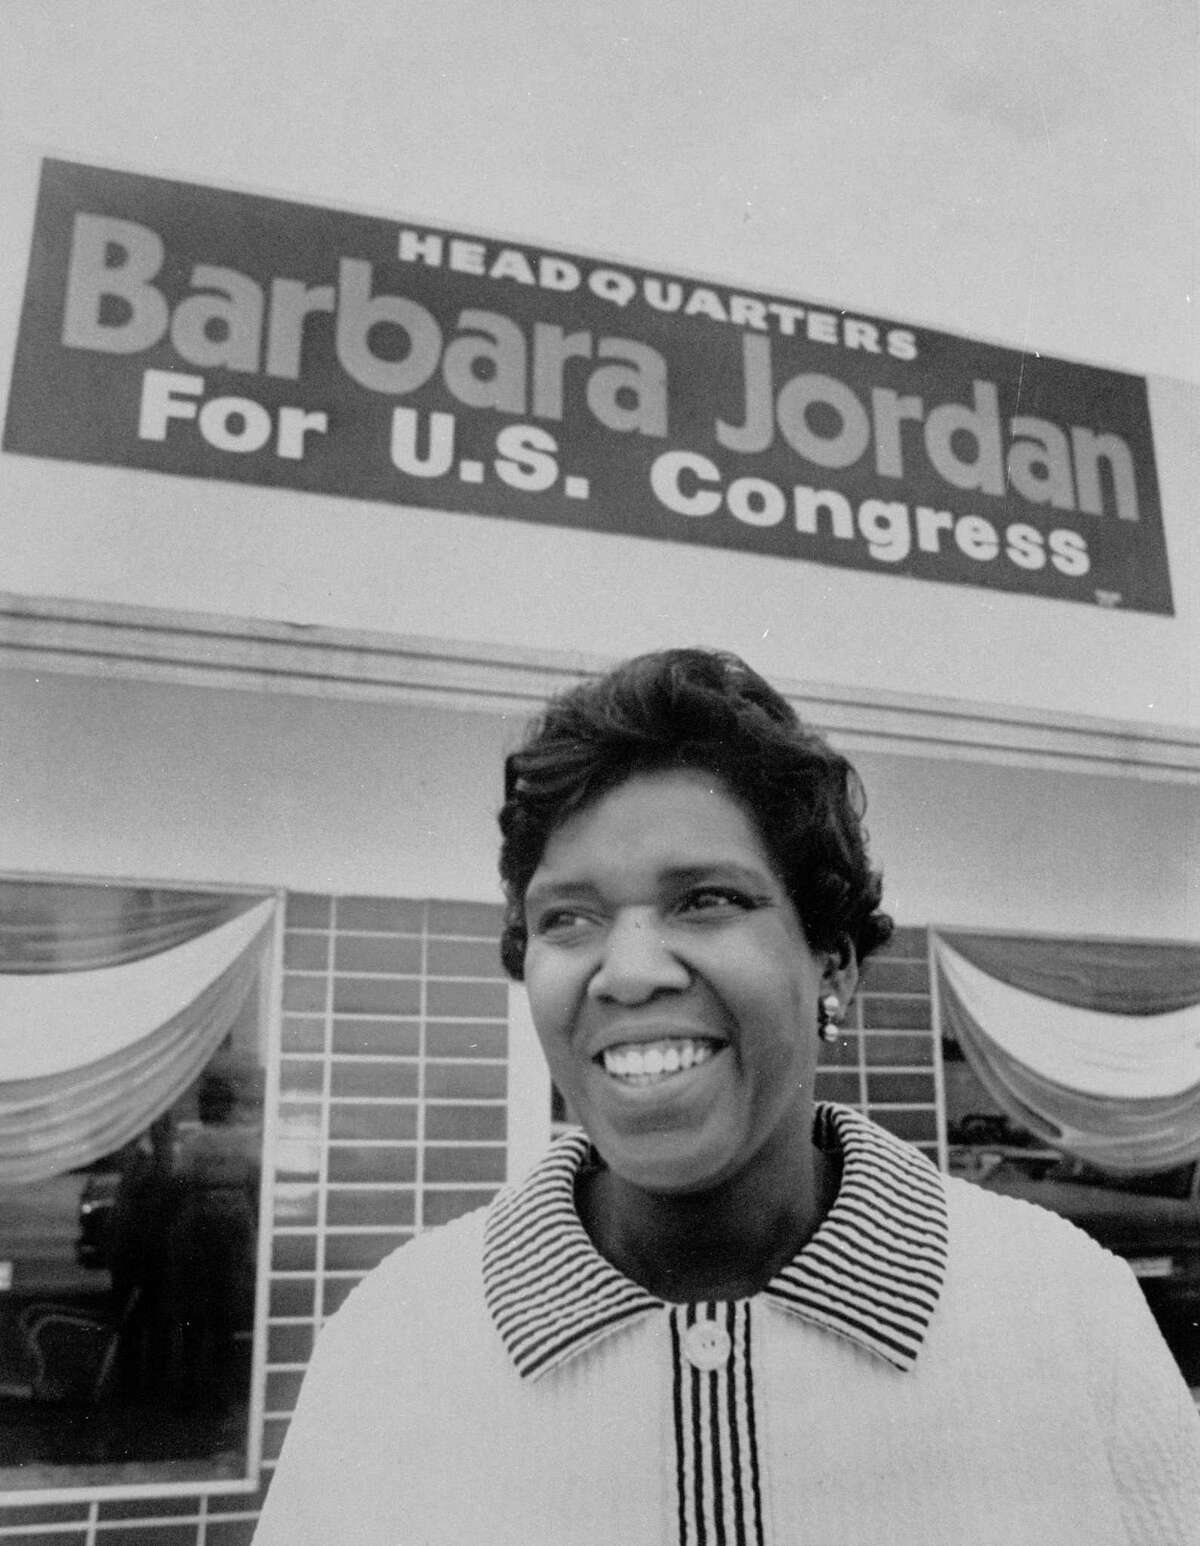 Barbara Jordan, 1936-1996  The Houstonian was the first African American elected to the Texas Senate post-Reconstruction and first black woman to be elected to the U.S. House of Representatives from the Deep South. She became the first woman to deliver the keynote speech at the Democratic National Convention in 1976. She was an ardent defender of the Constitution, and famously scorned Richard Nixon for violating the document during impeachment hearings.